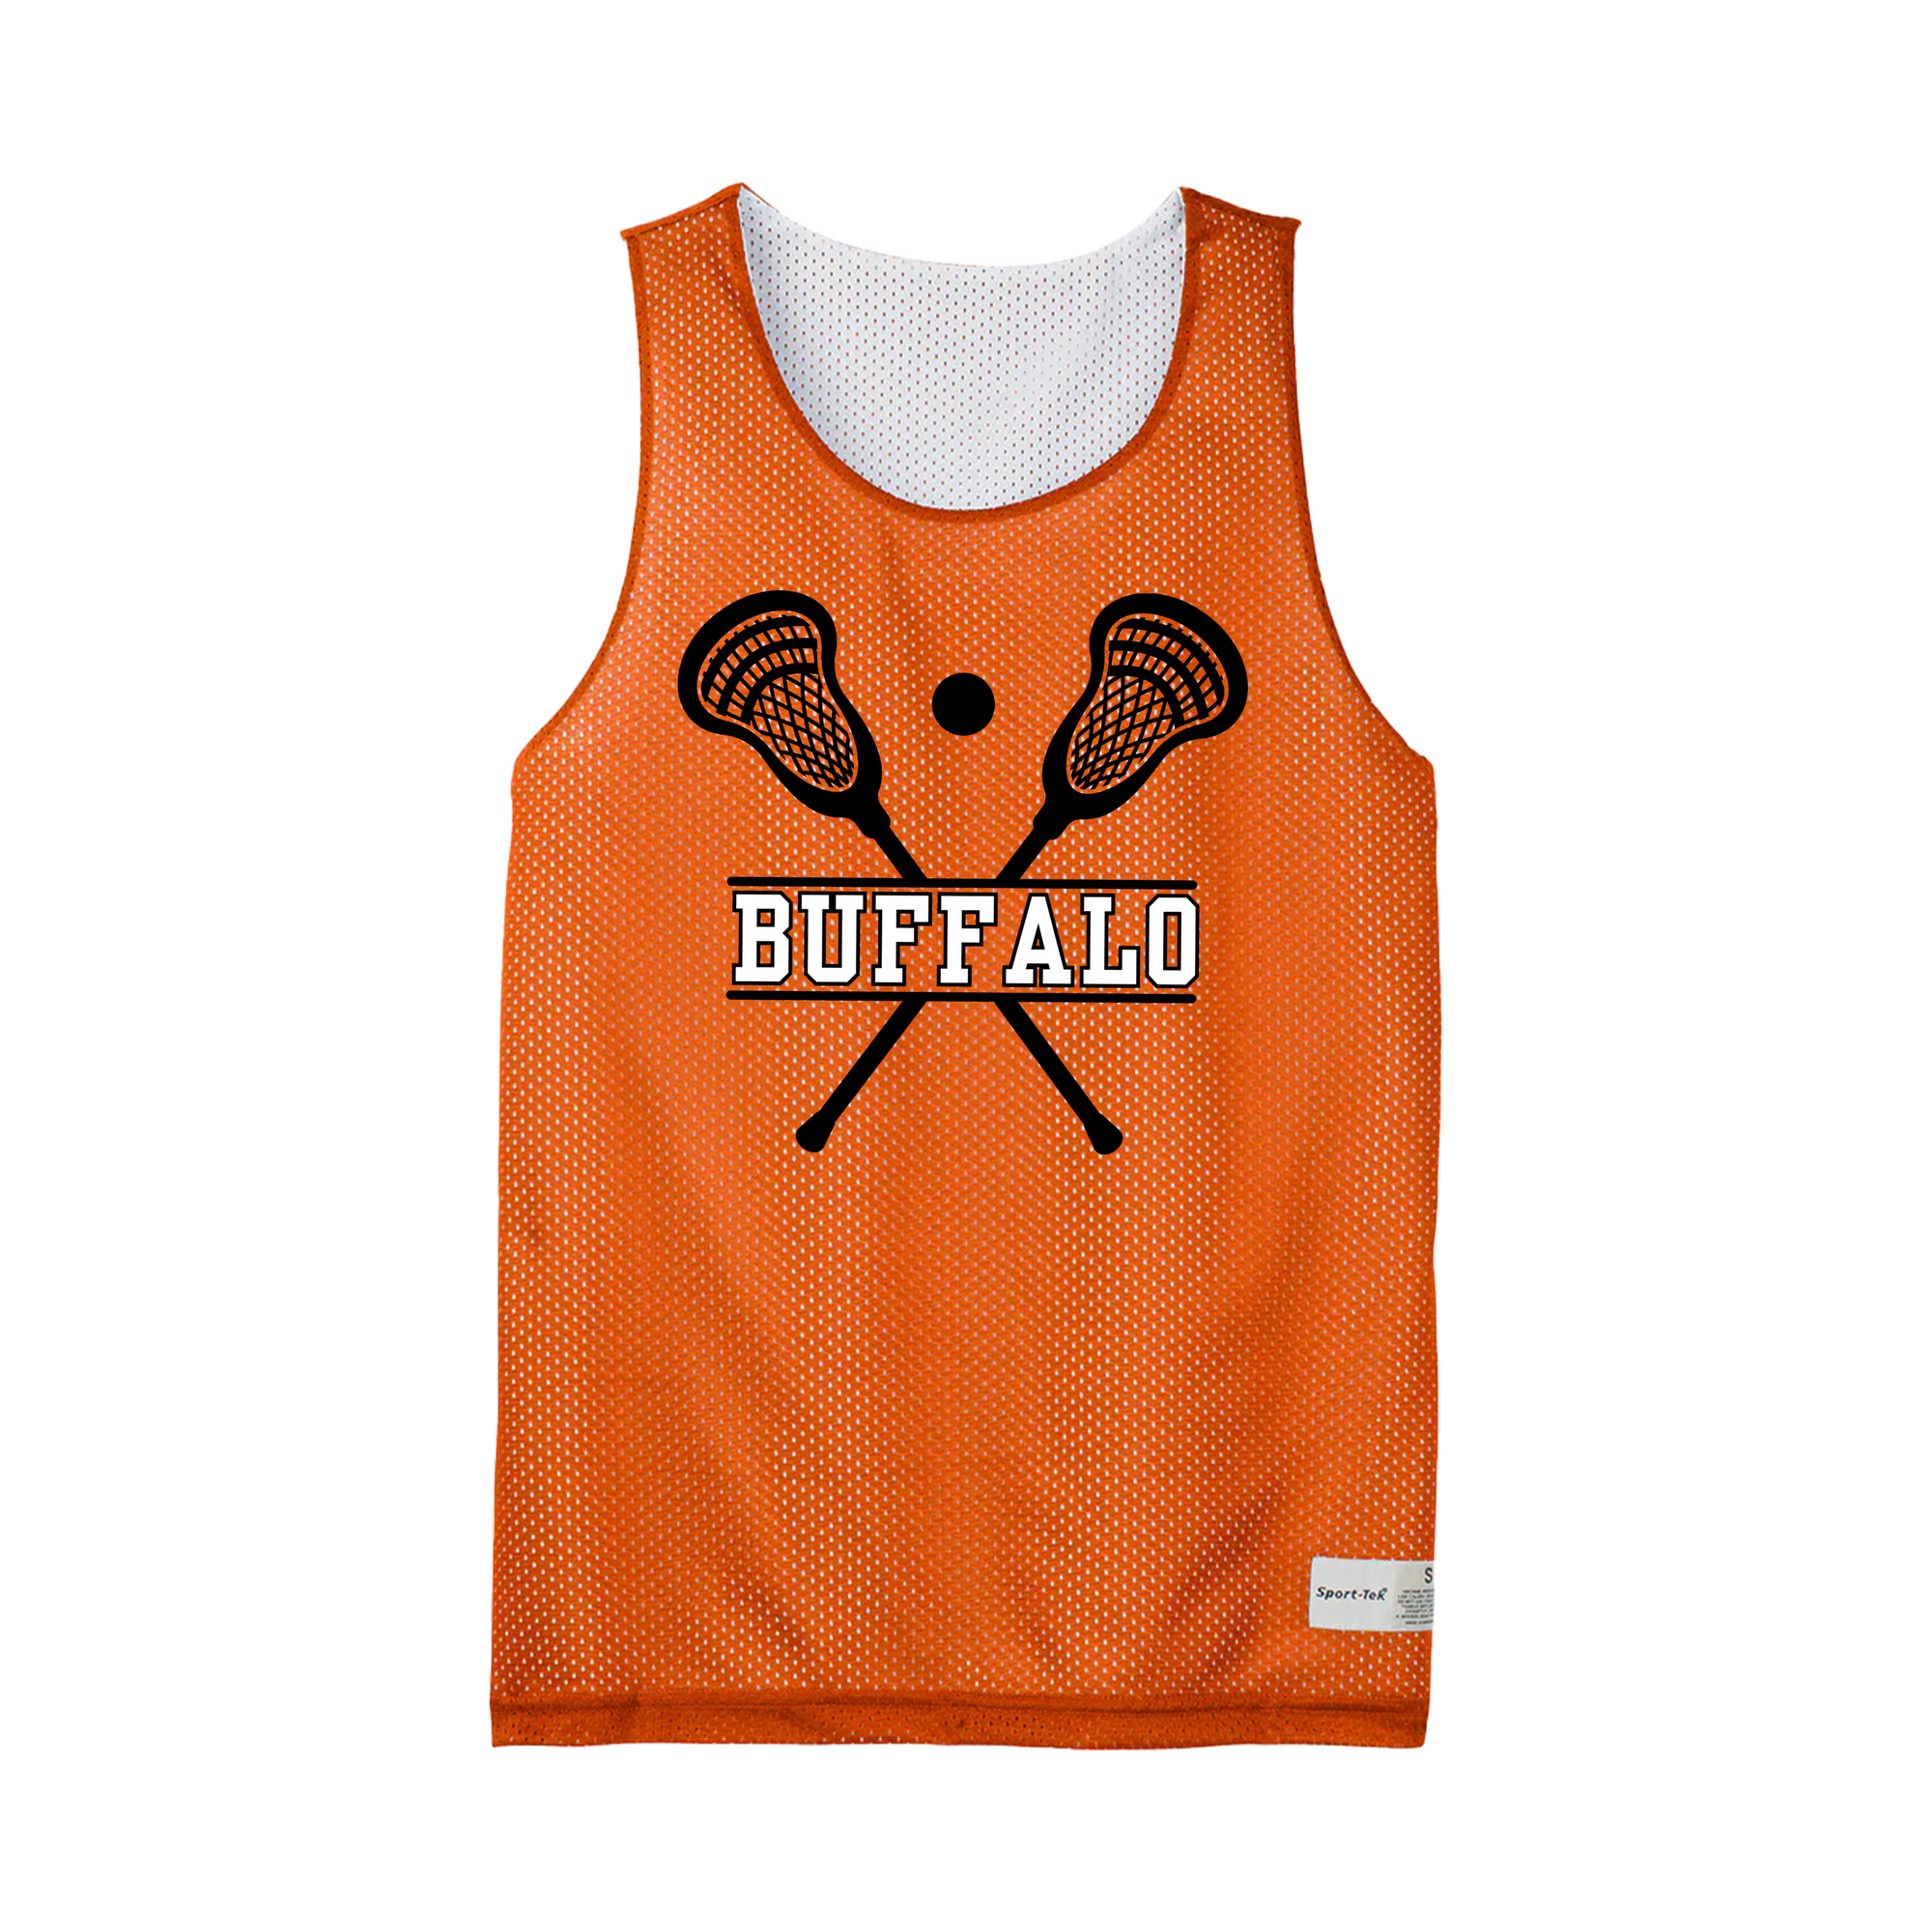 Buffalo Lacrosse Orange Tank Top Pinnie with 2 lacrosse sticks and a ball